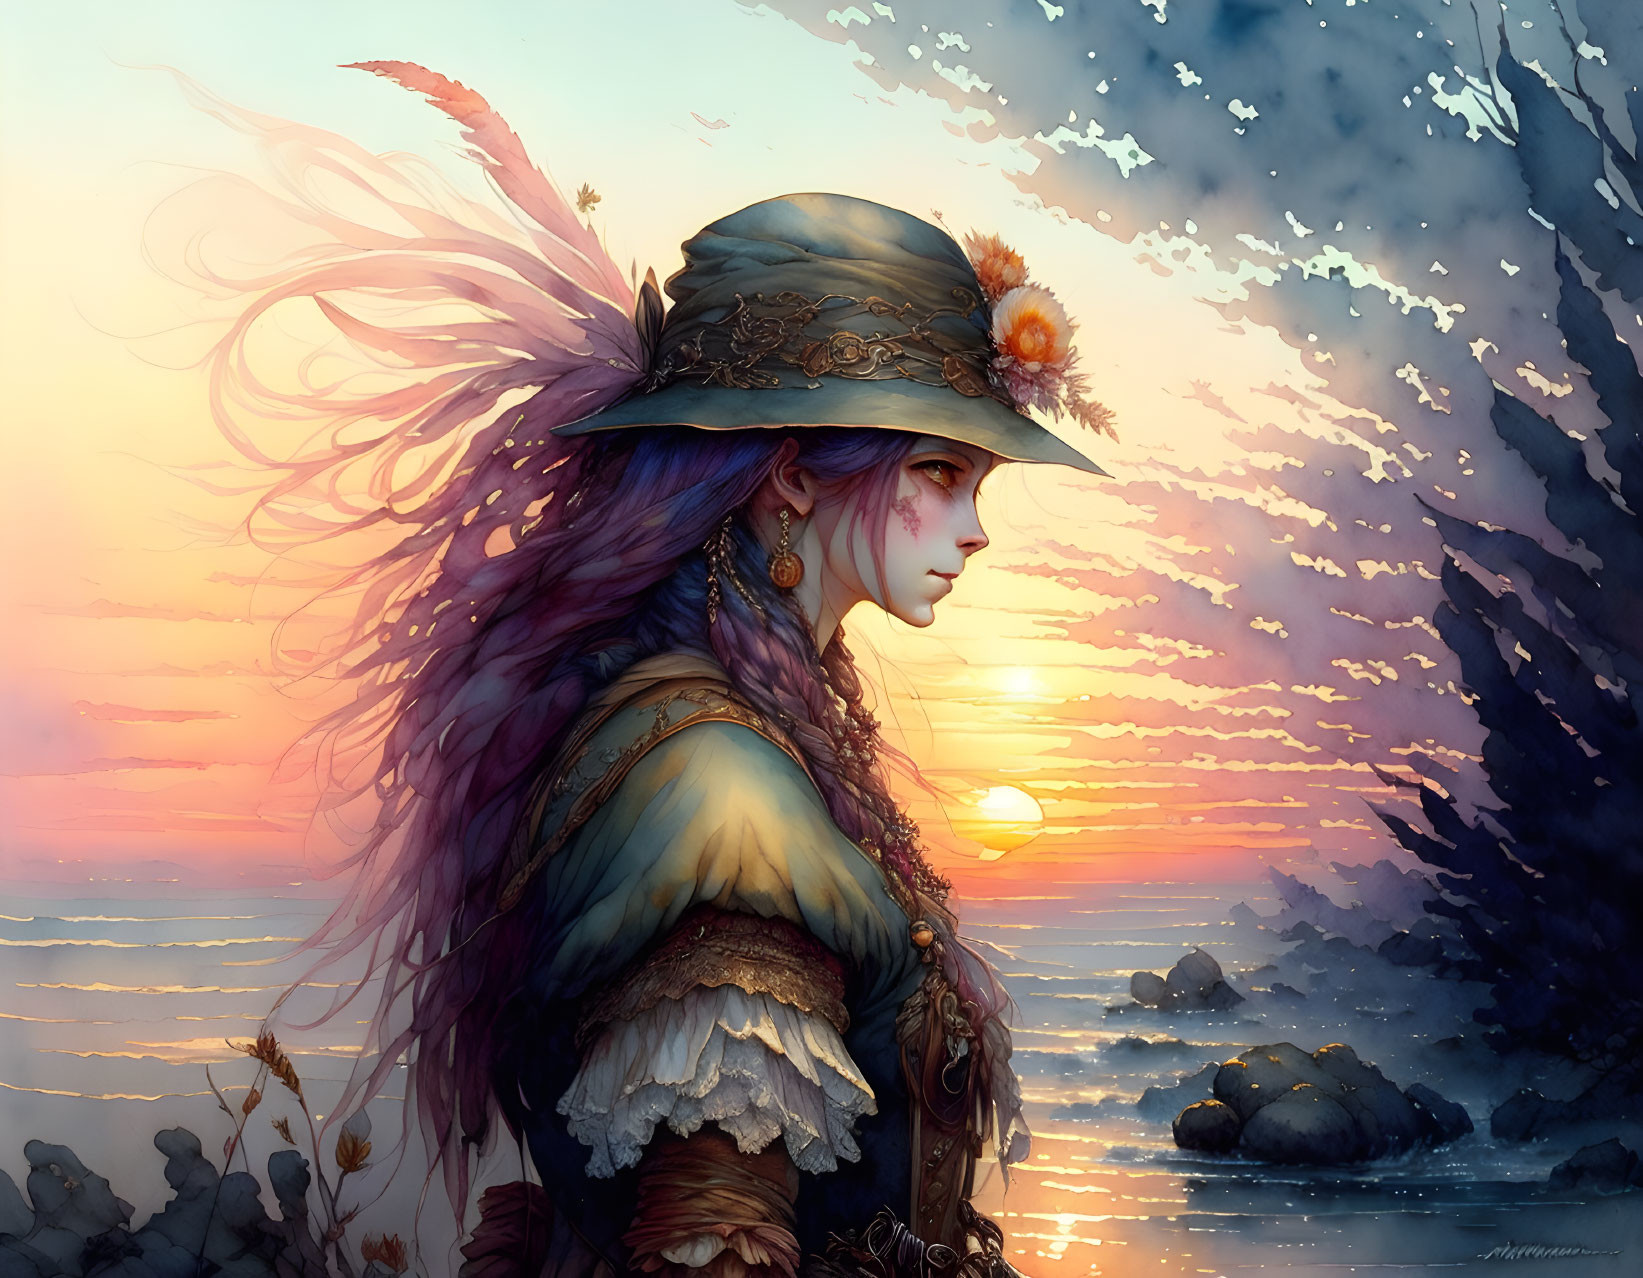 Female character with purple hair and hat at beach sunset - ethereal theme